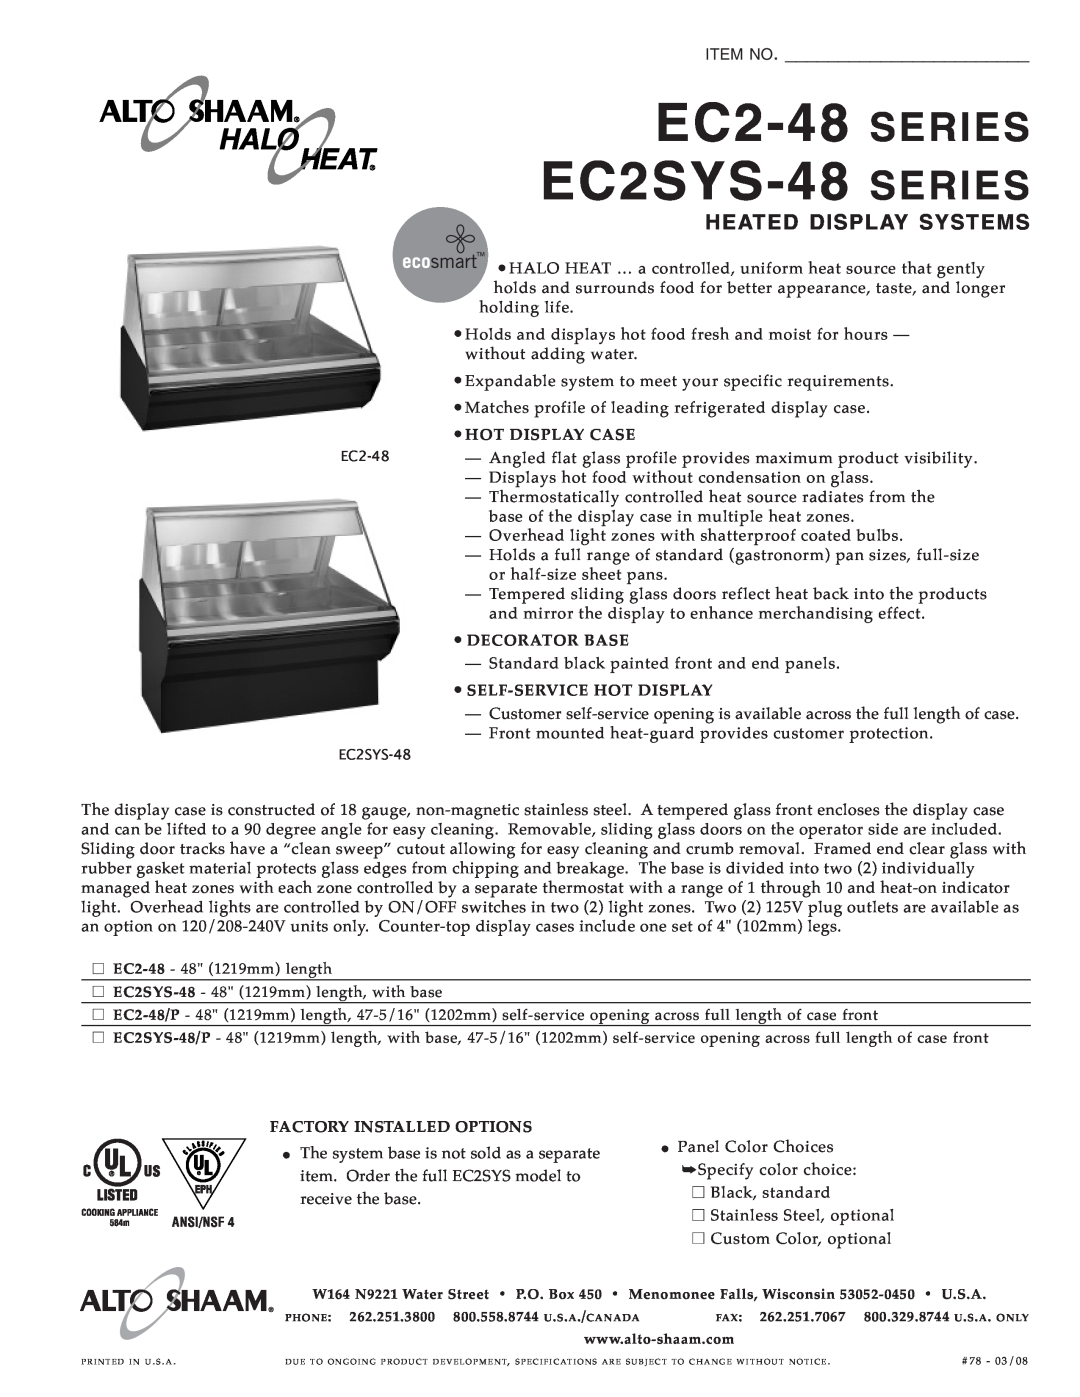 Alto-Shaam EC2-48 Series, EC2SYS-48 series specifications EC2 SYS-48, Item No, Heated Display Syste Ms 